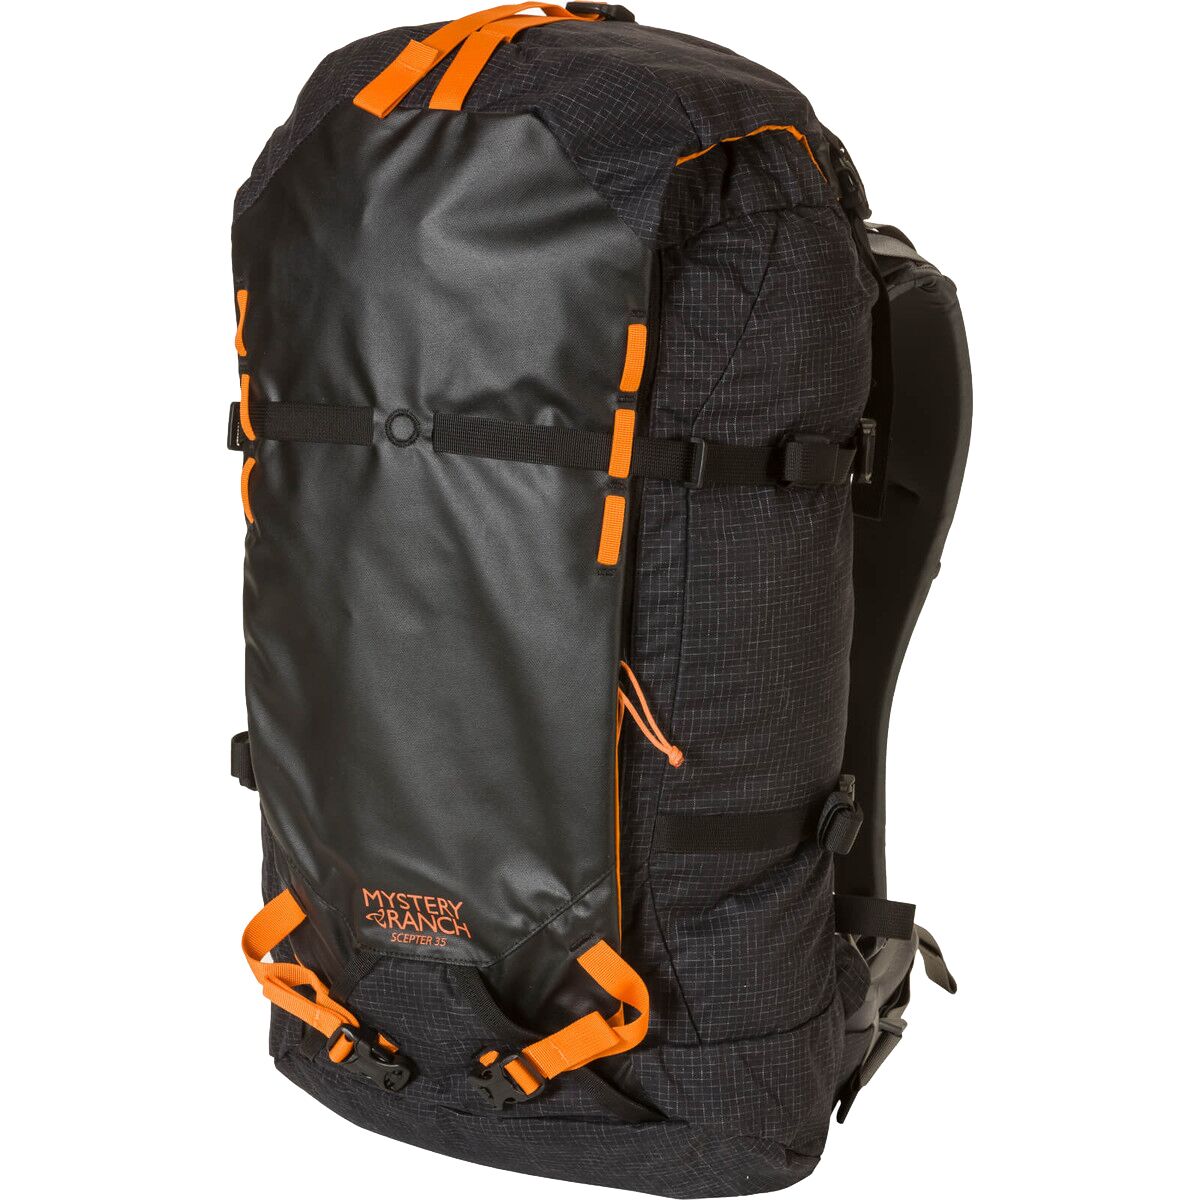 Photos - Backpack Mystery Ranch Scepter 35L  